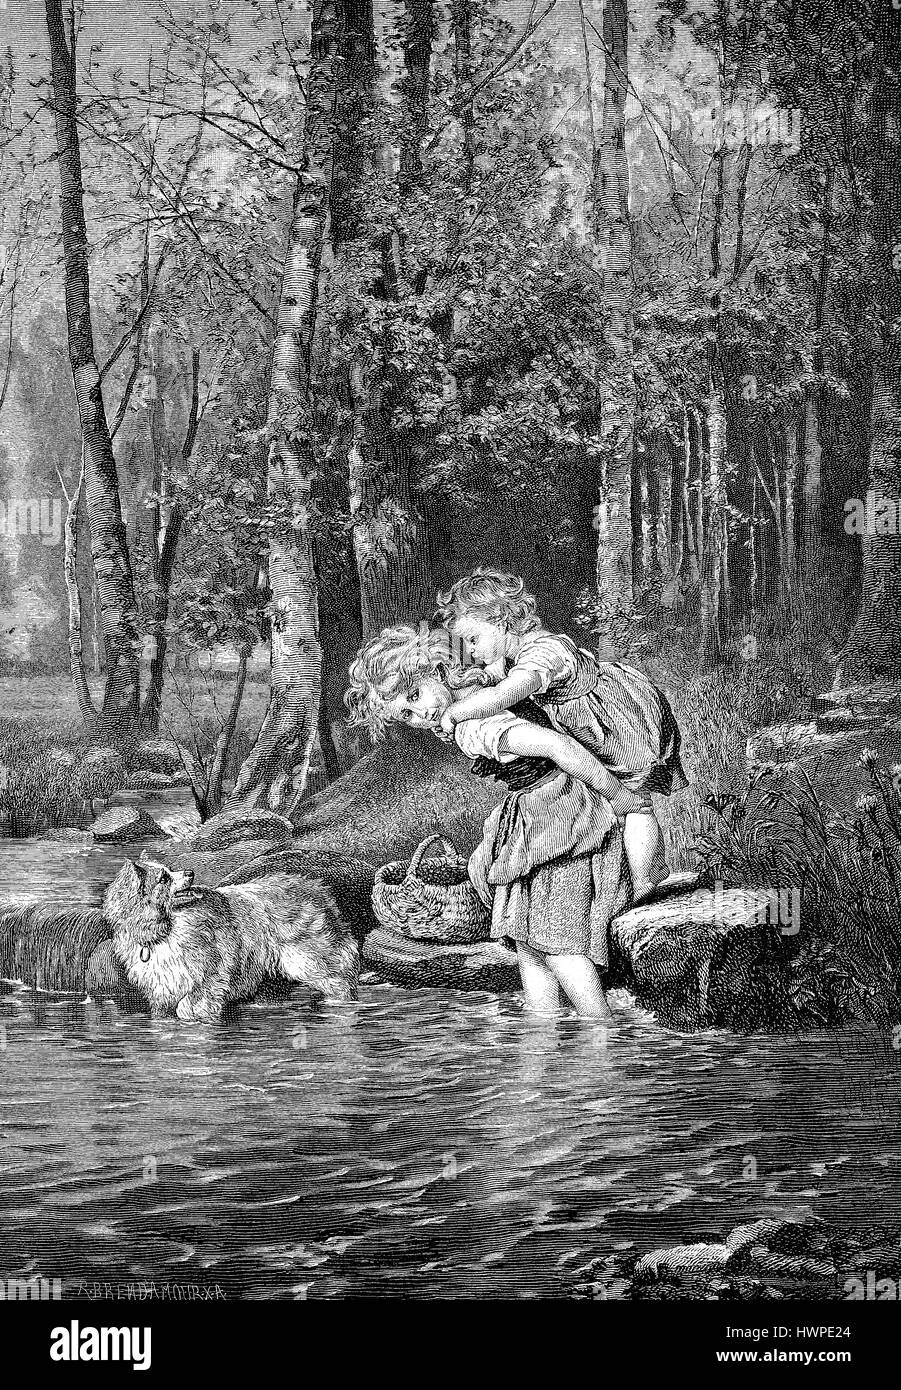 Girls carry little sister piggy-back through a Creek, Reproduction of an original woodcut from the year 1882, digital improved Stock Photo